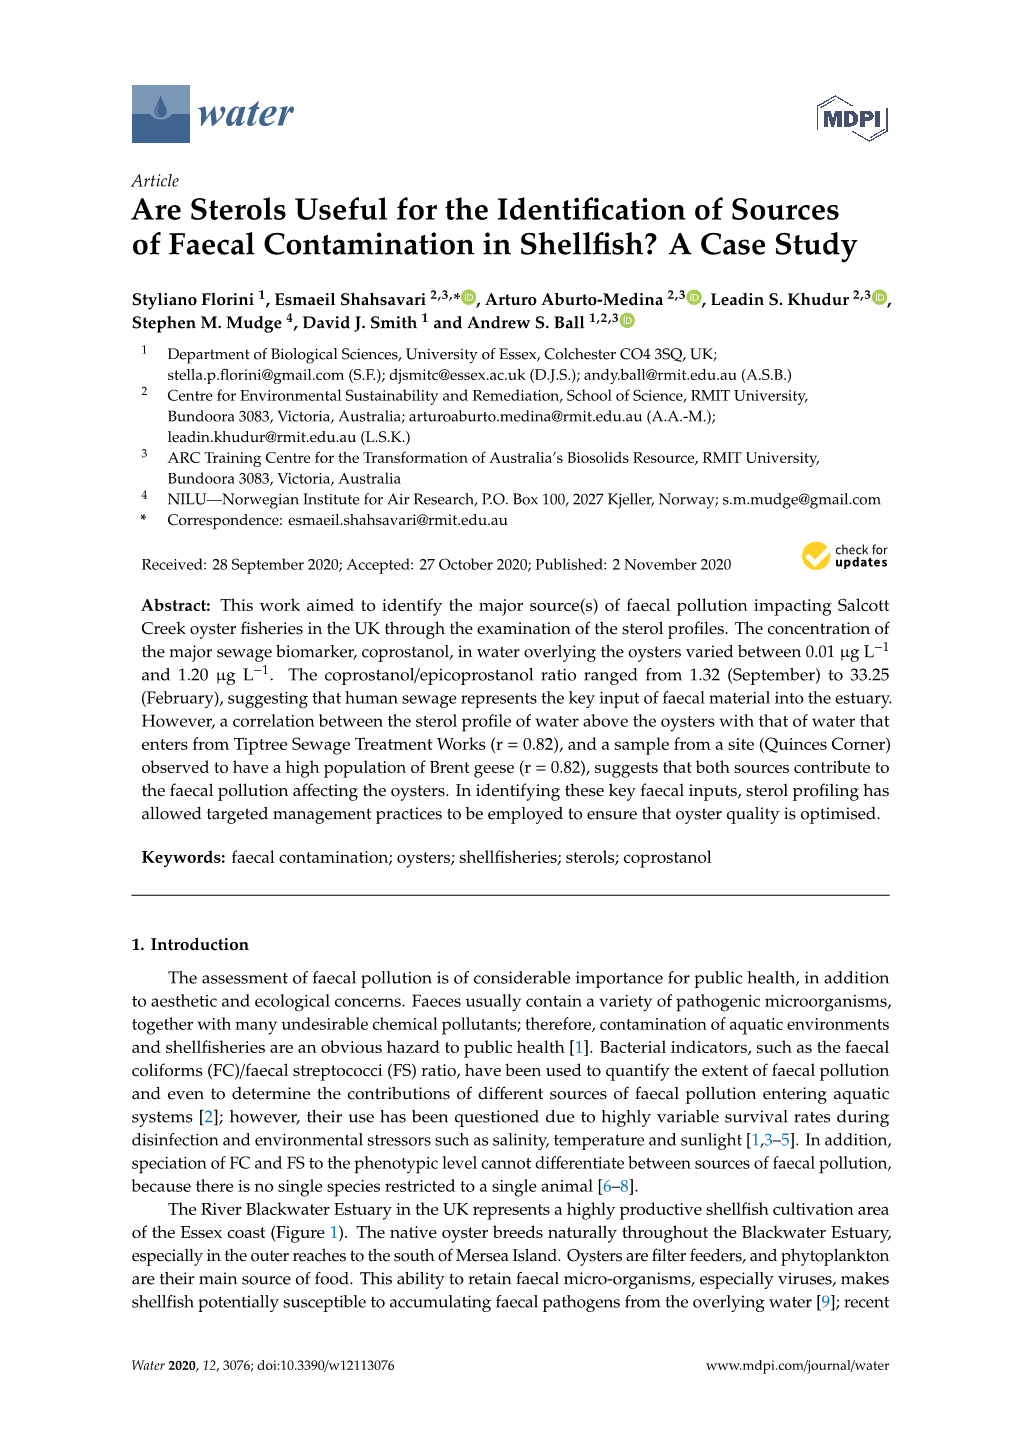 Are Sterols Useful for the Identification of Sources of Faecal Contamination in Shellfish?